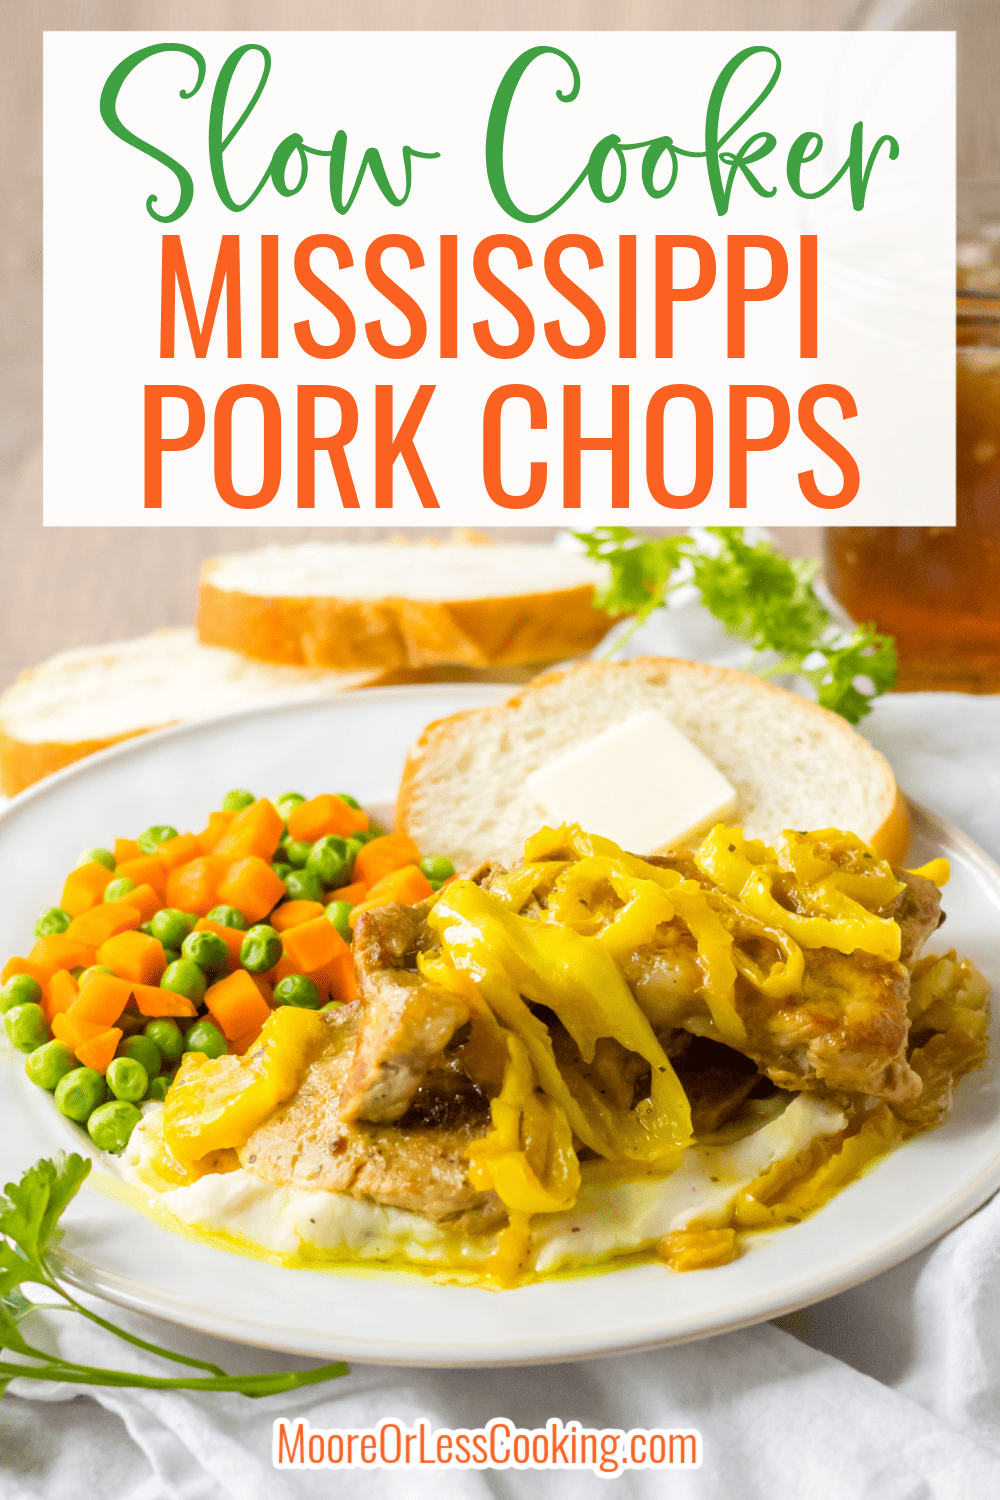 These Slow Cooker Mississippi Porkchops are an awesome and yummy dinner! Such an easy dinner too. This super tasty dinner is made by quickly browning up the Porkchops in a pan then placing in a 8 quart slow cooker with Pepperoncinis, a Ranch and Brown Gravy Packet and a stick of Butter, that’s it! It really is that easy! You’ll be wanting this every night! via @Mooreorlesscook